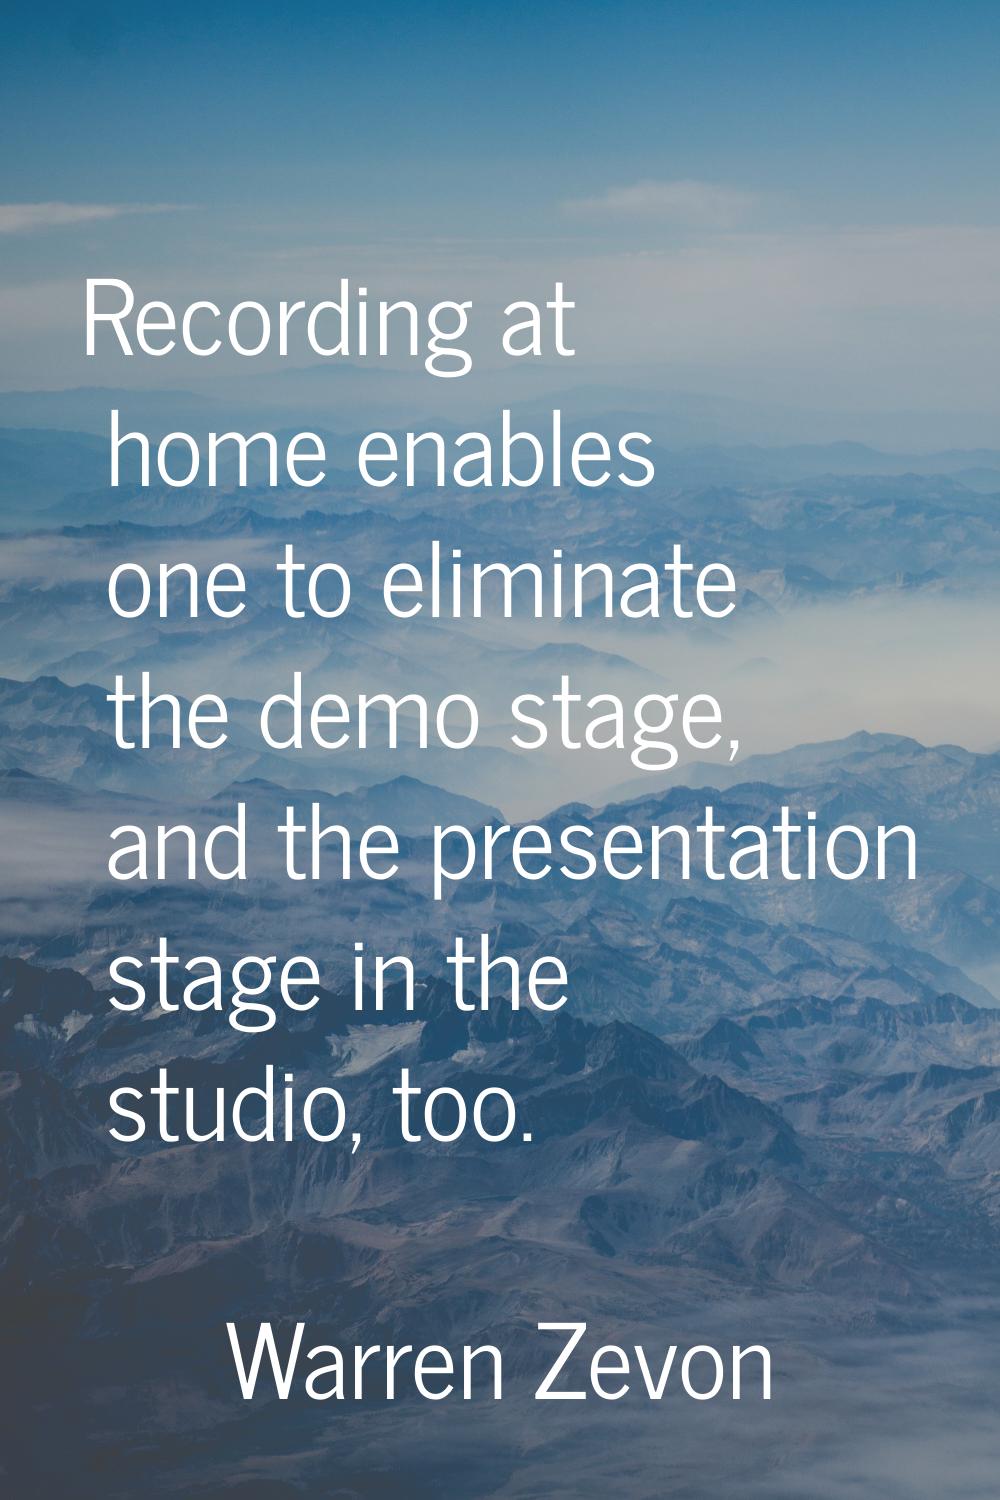 Recording at home enables one to eliminate the demo stage, and the presentation stage in the studio